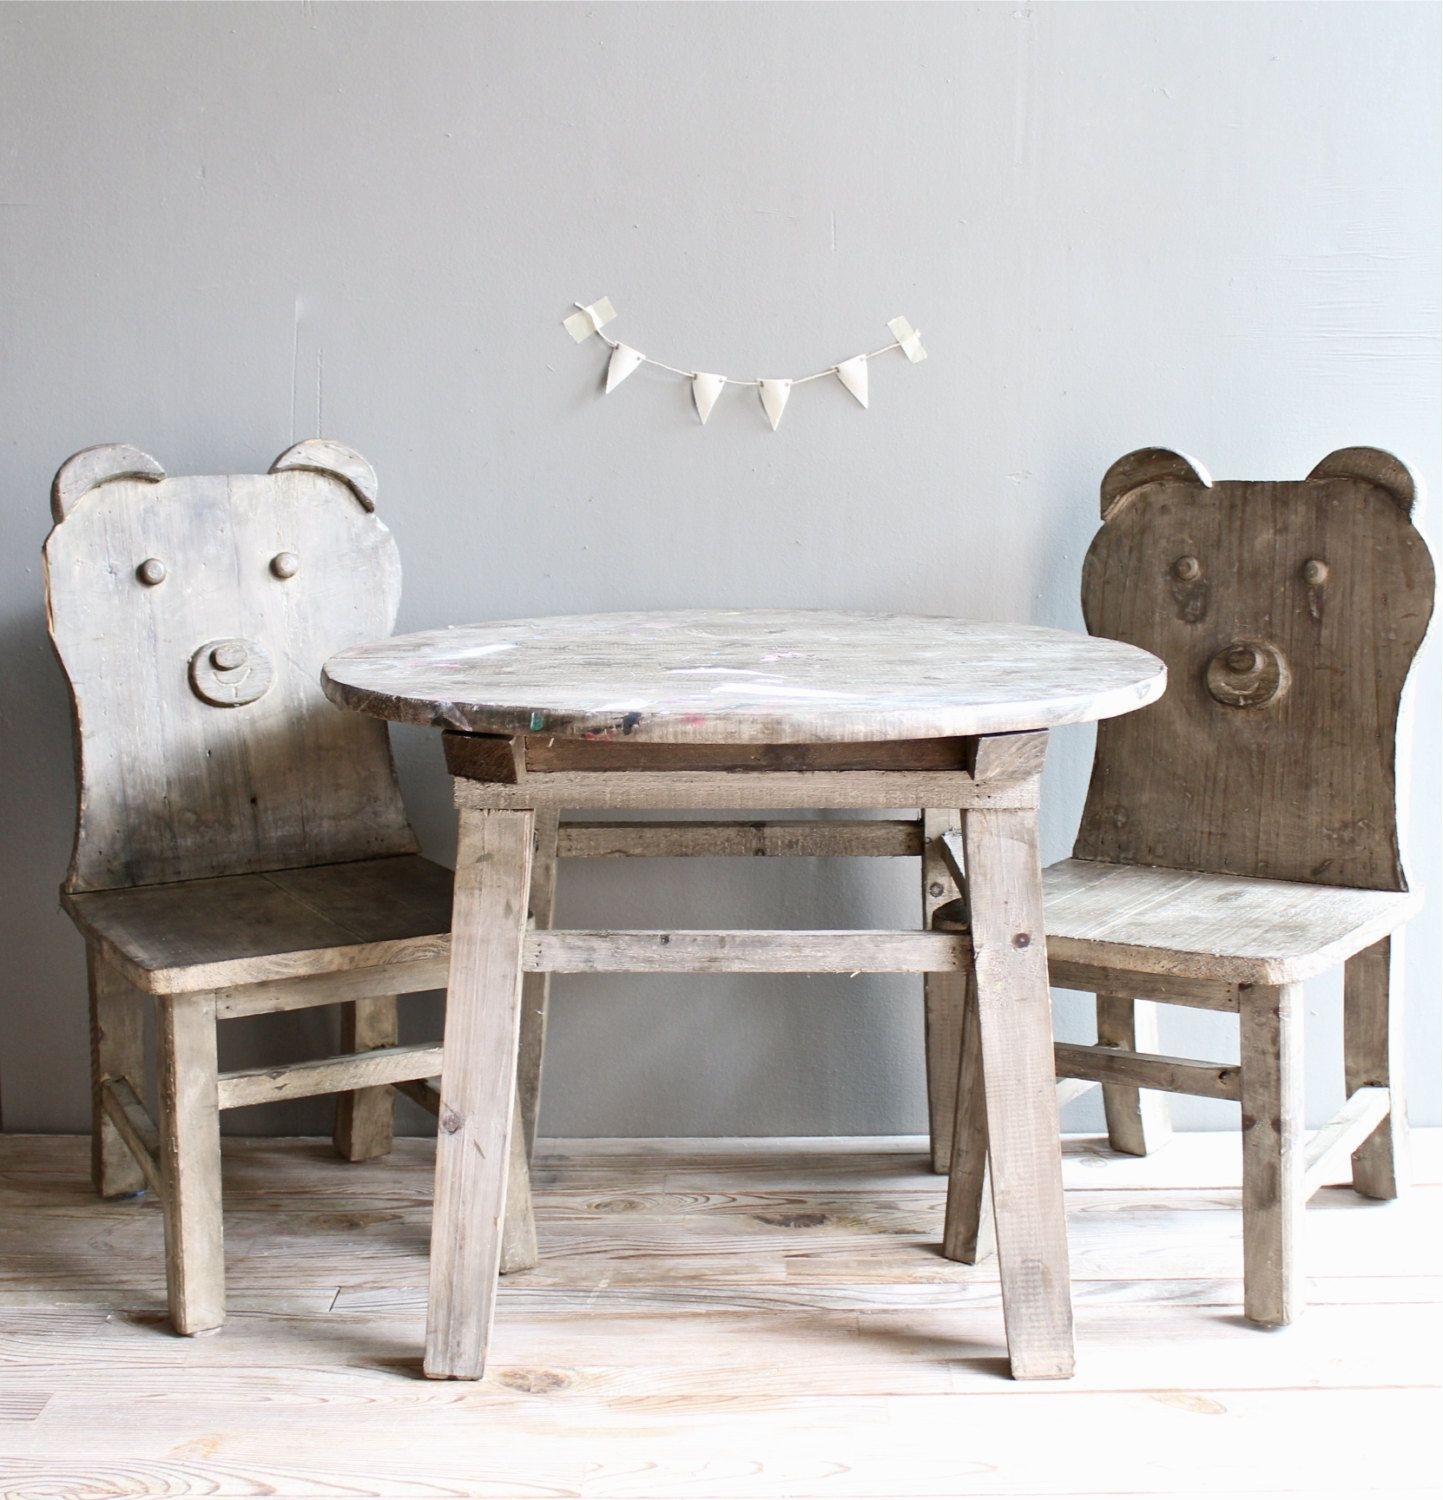 small childrens wooden table and chairs